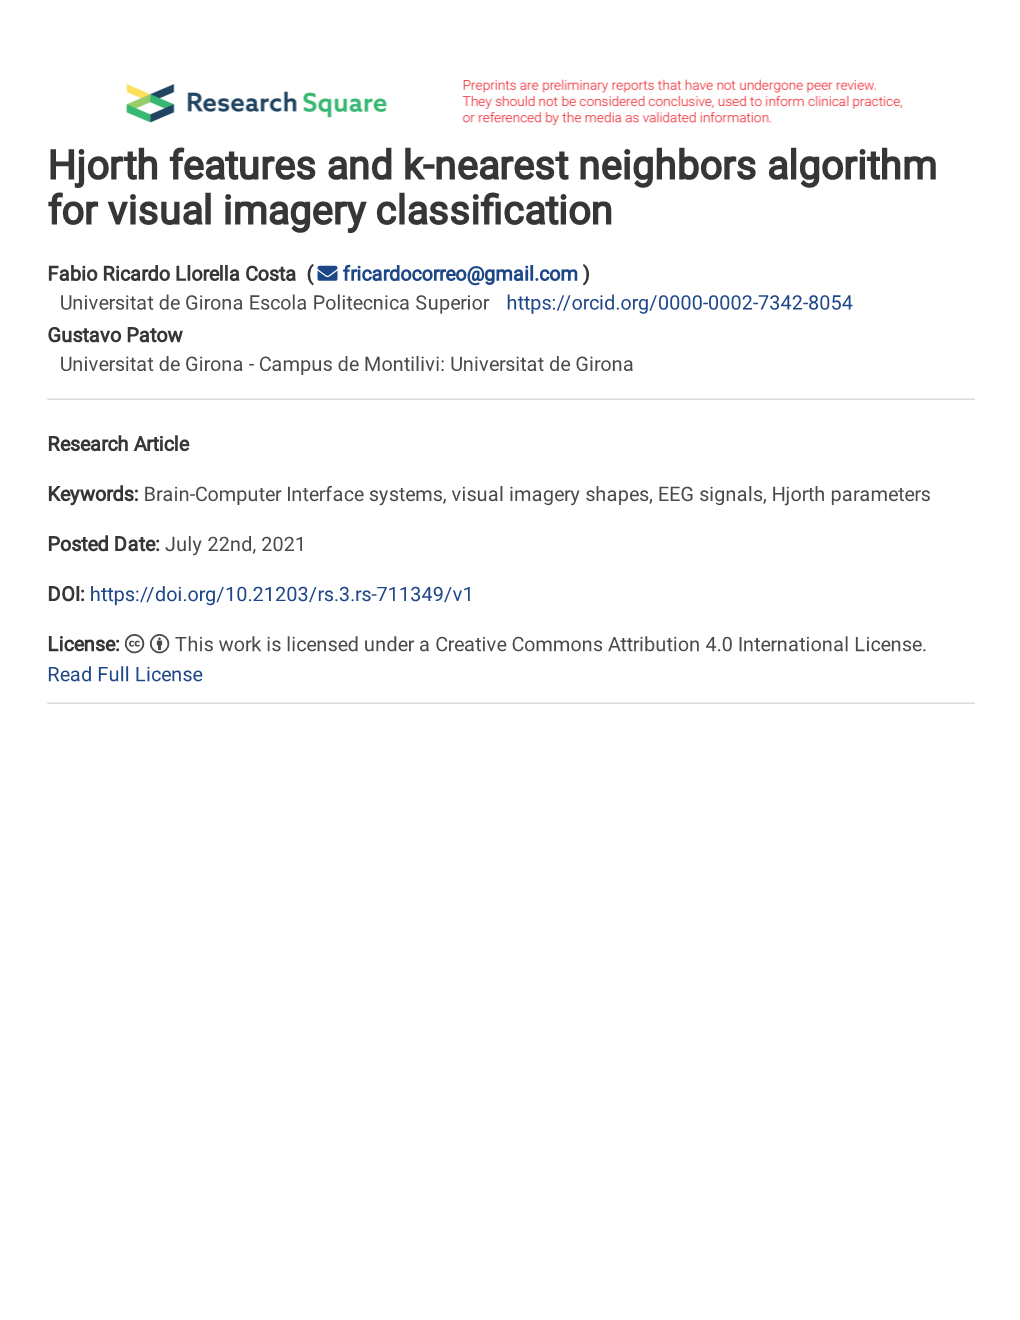 Hjorth Features and K-Nearest Neighbors Algorithm for Visual Imagery Classi Cation